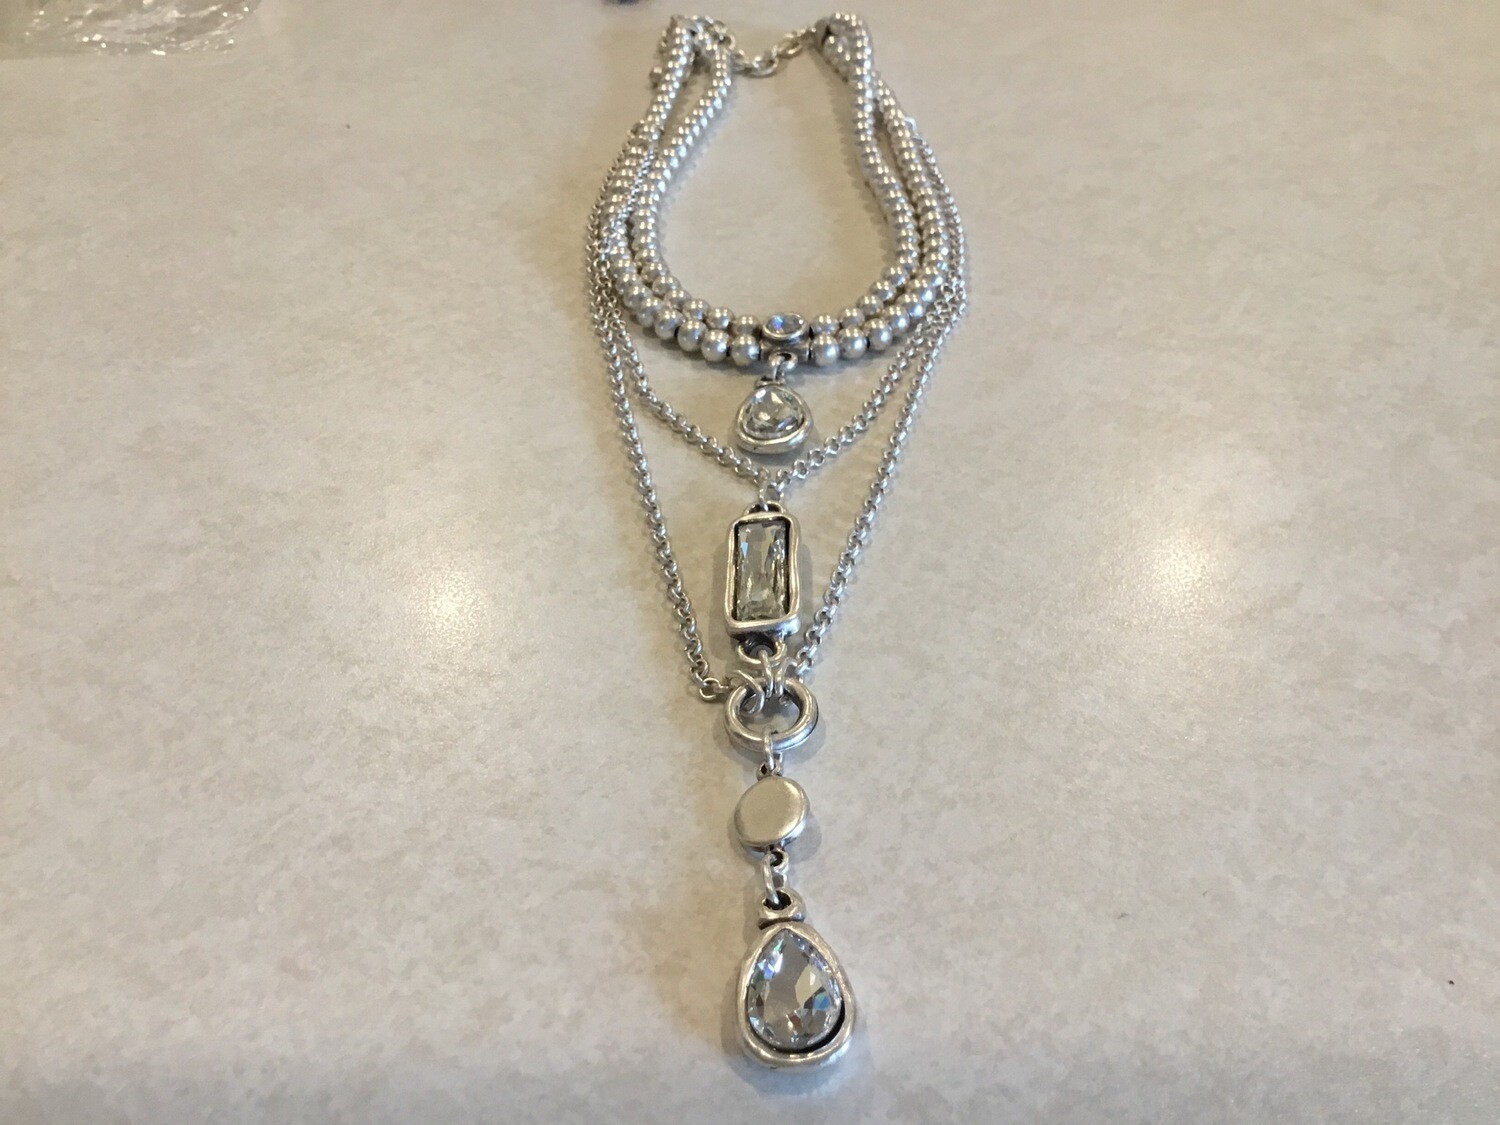 Handmade Pewter Layered Necklace With Three Drop Crystals